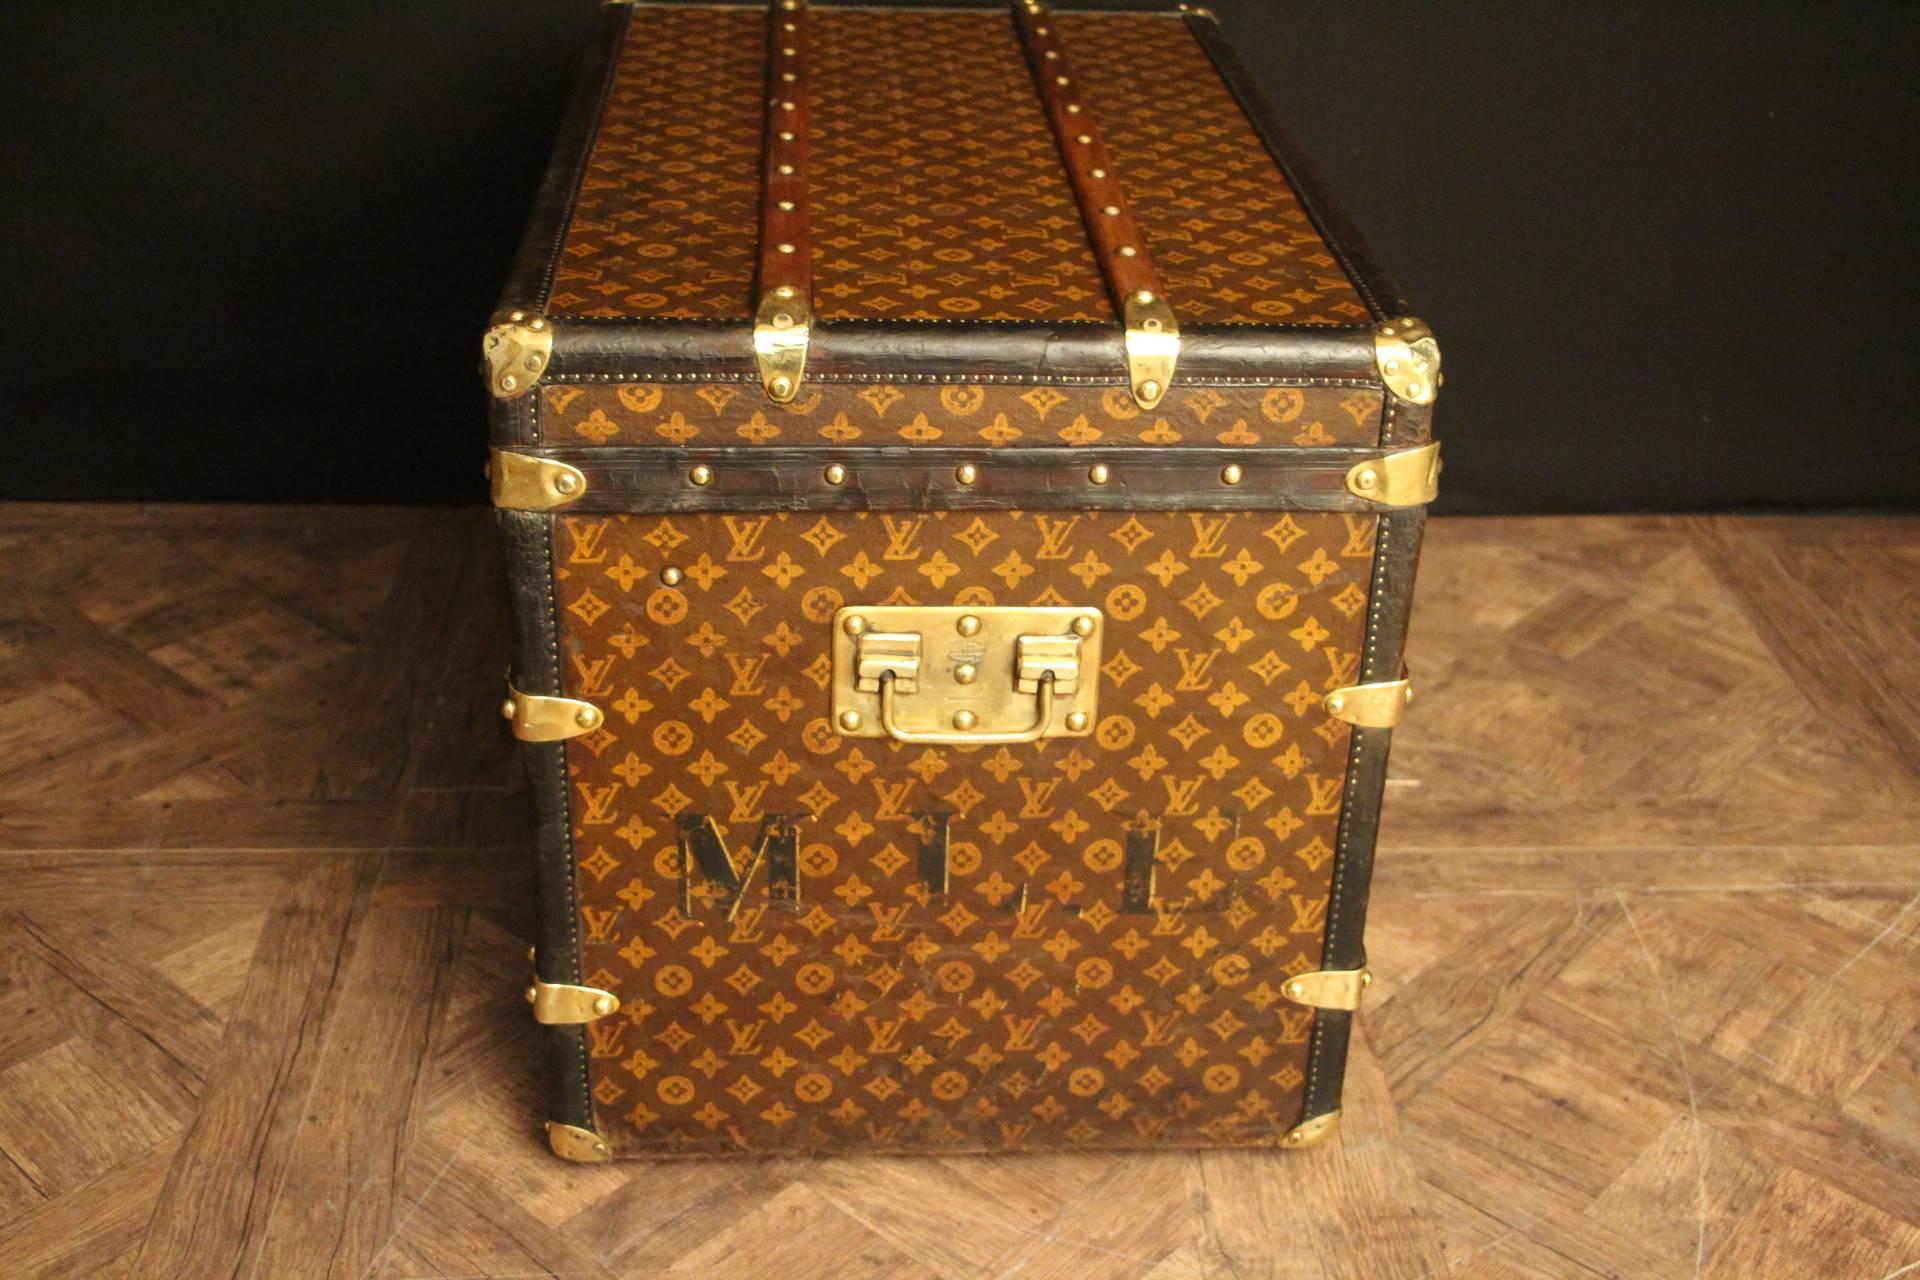 This beautiful and rare courrier trunk by Louis Vuitton features stenciled monogram canvas, with leather trim, brass corners, brass handles and has a remarkable patina.
Its interior is all original too. It could easily be used for storage or as a